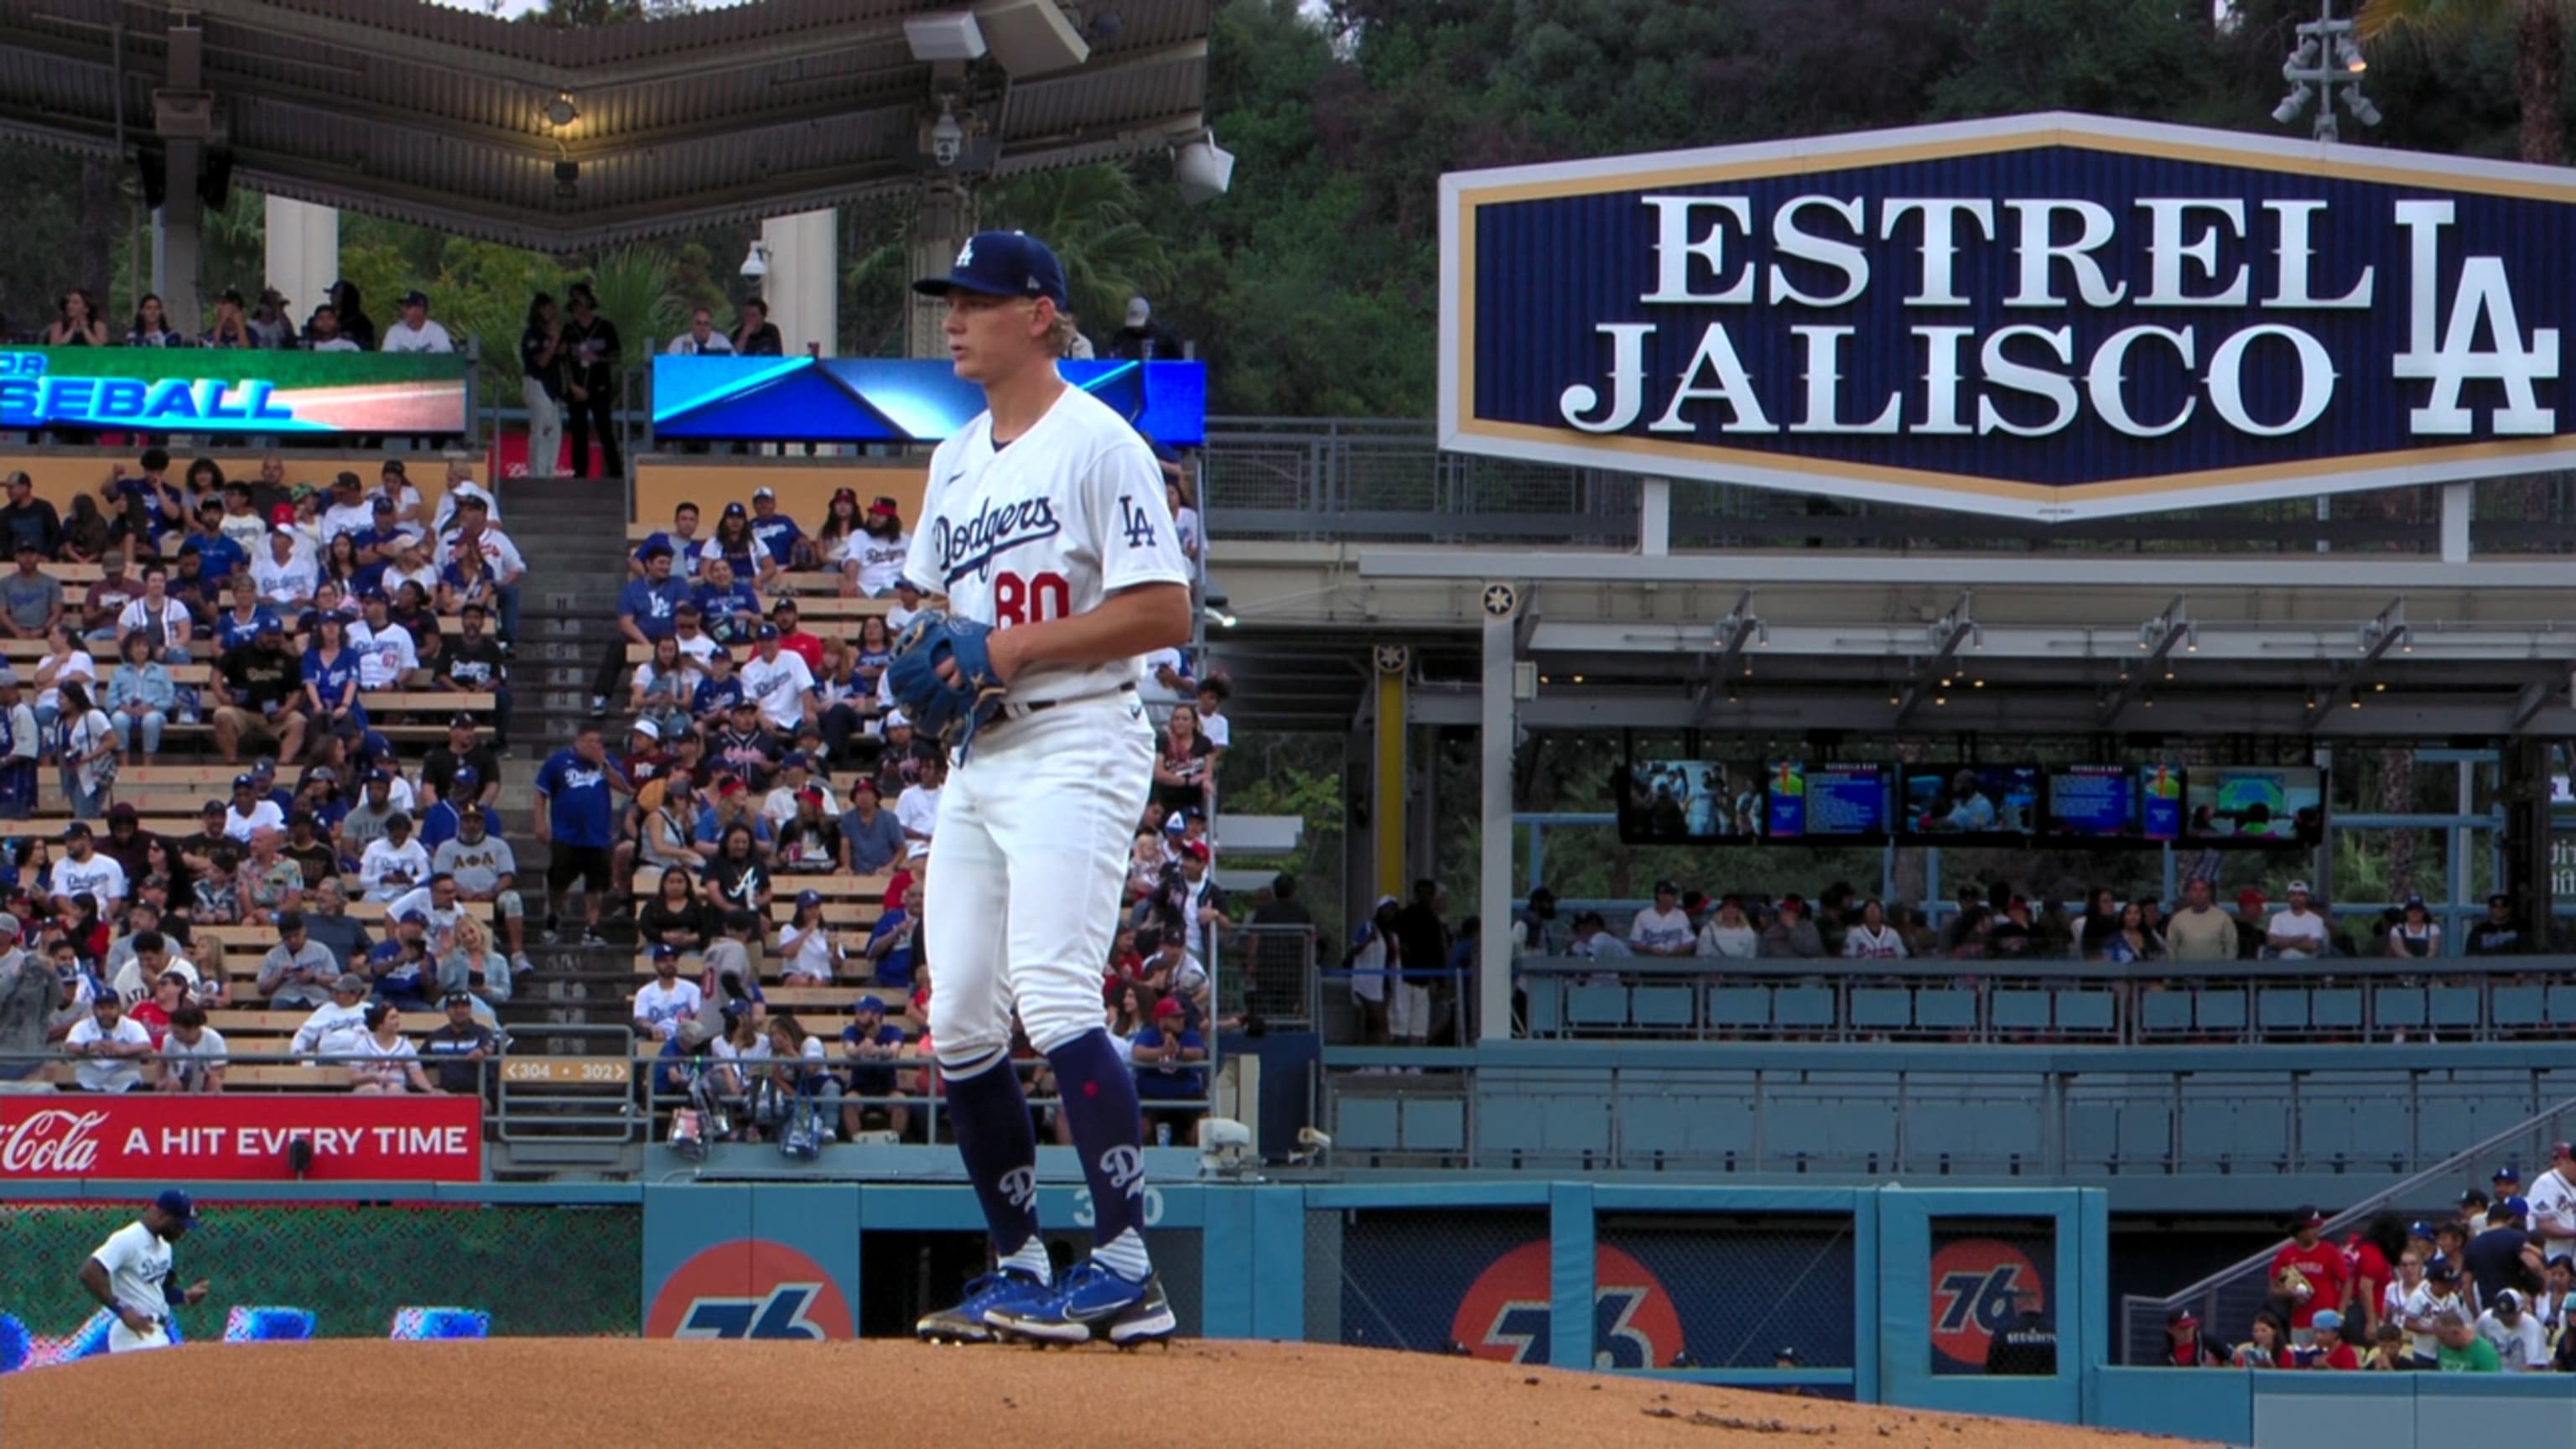 Dodgers' season is over as talk is cheap against streaking Braves